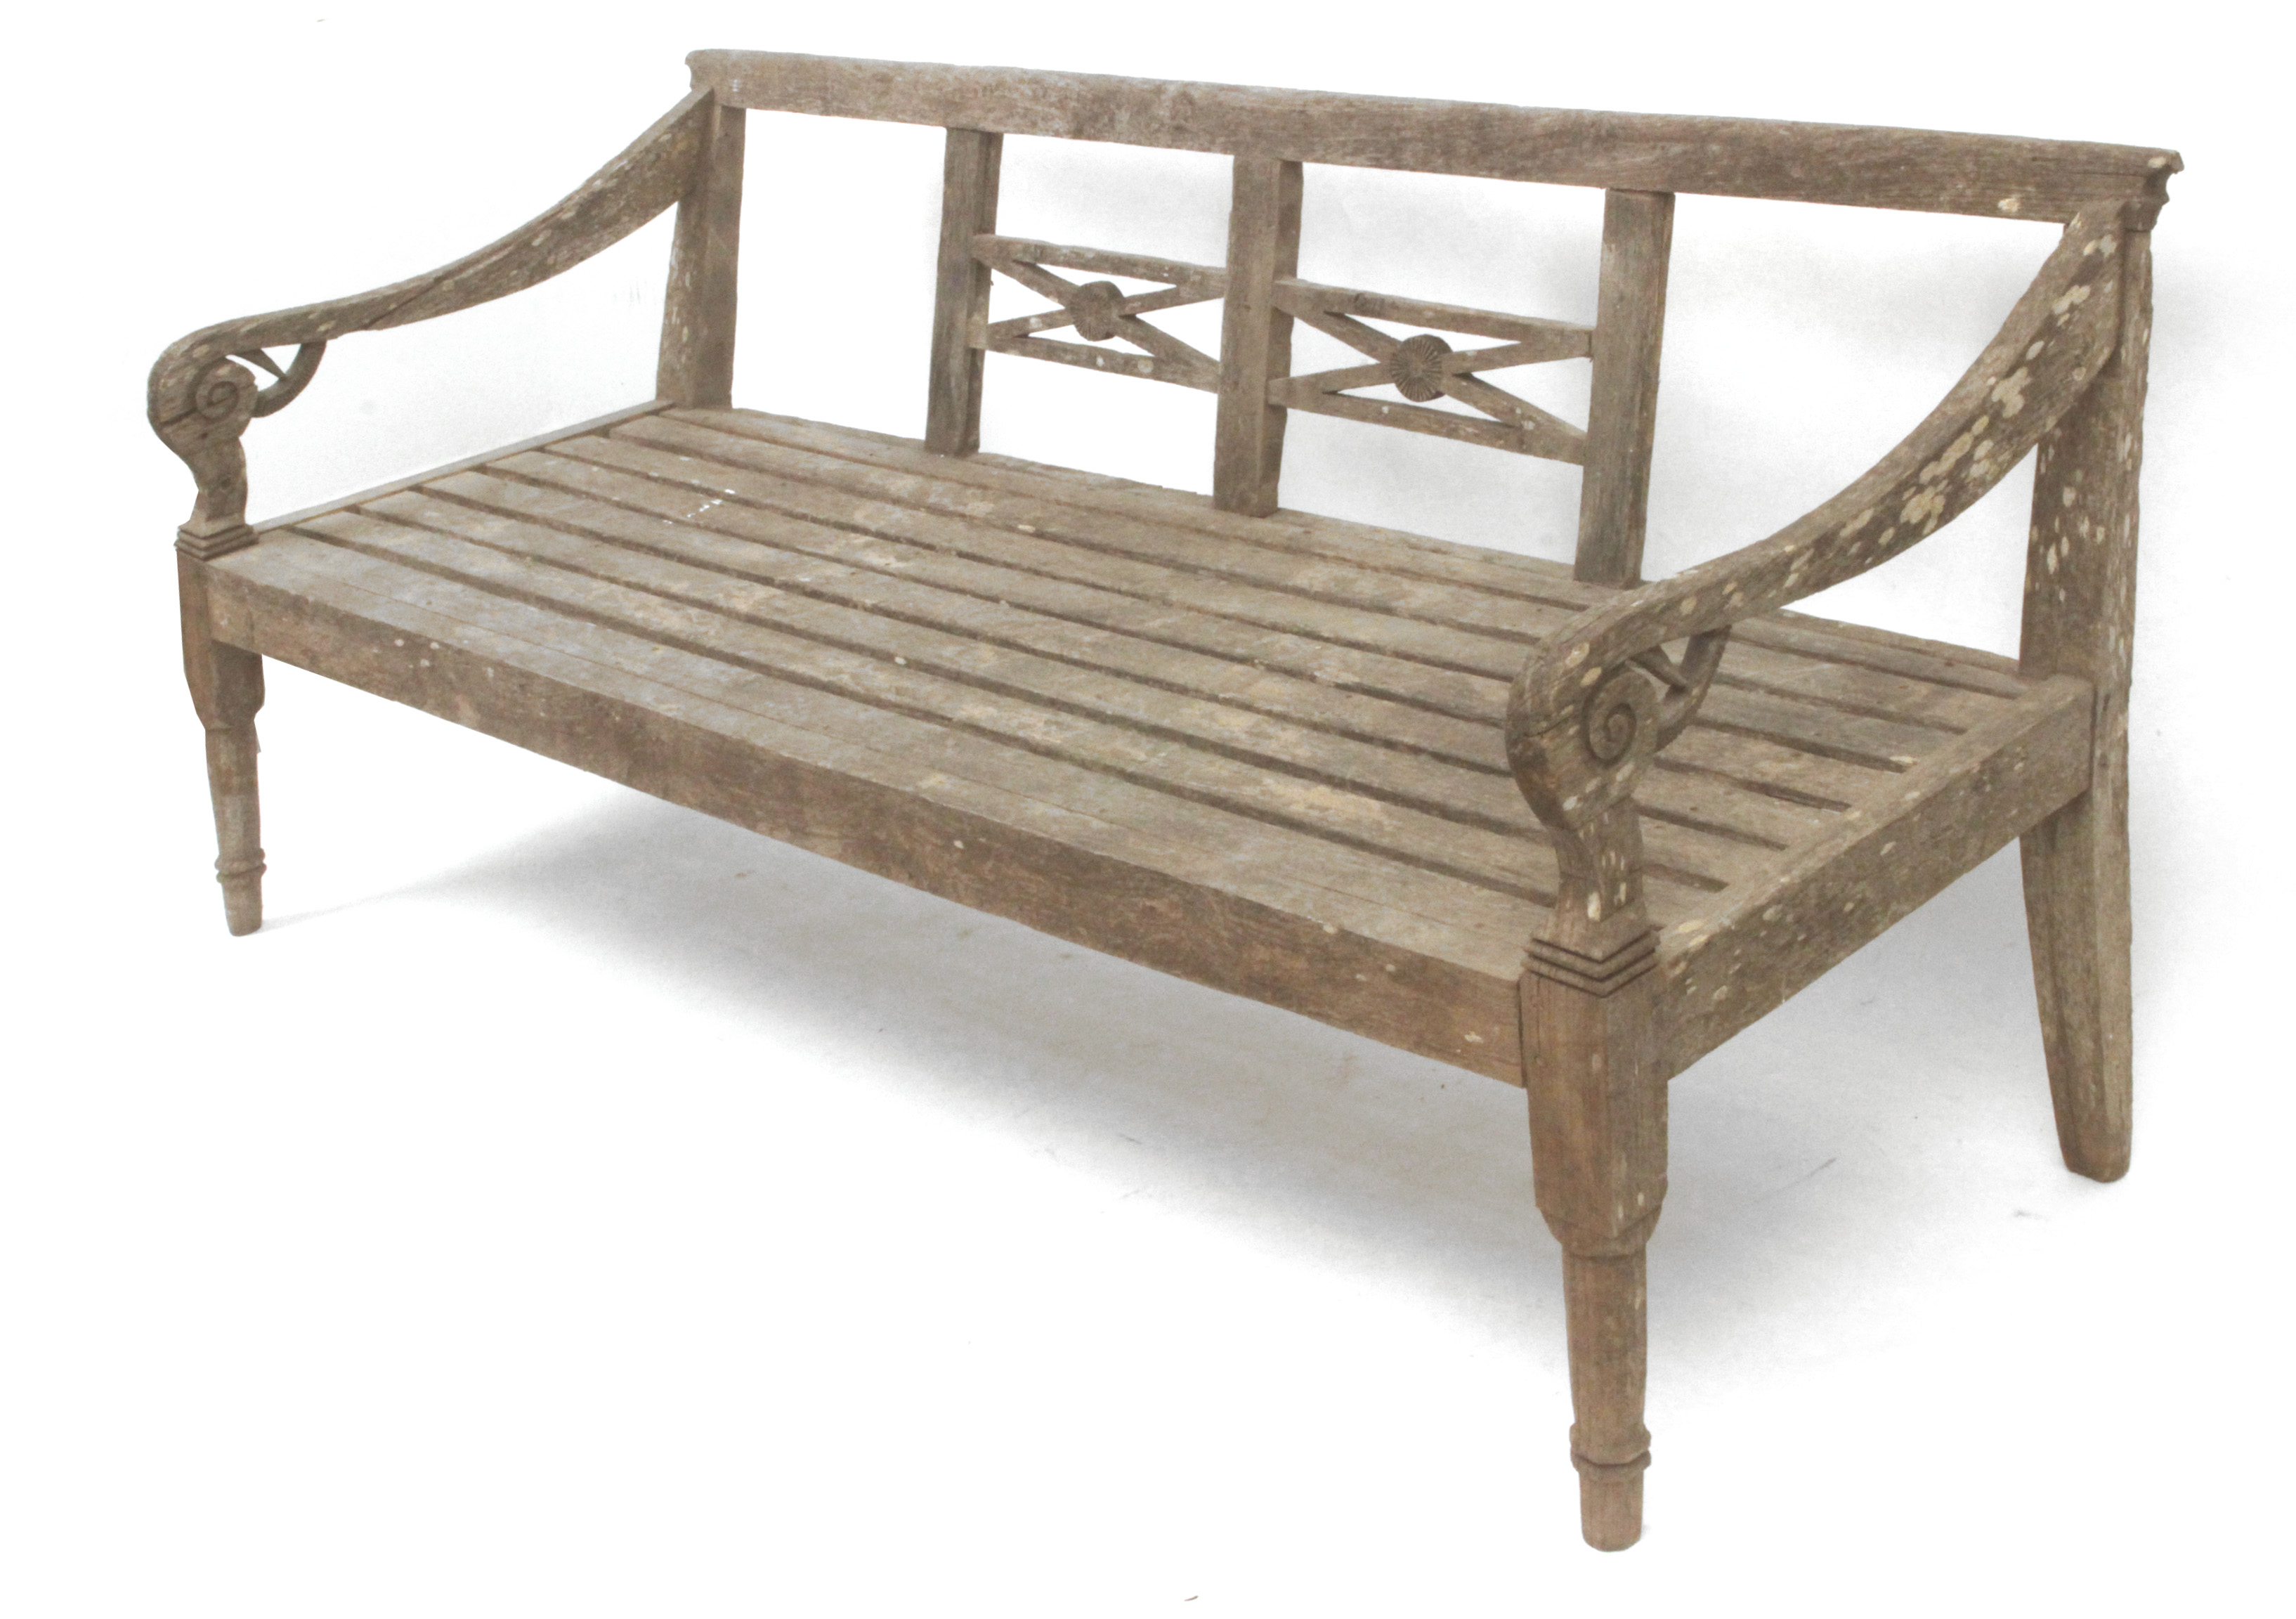 A rustic bench circa 1900 - Image 2 of 4